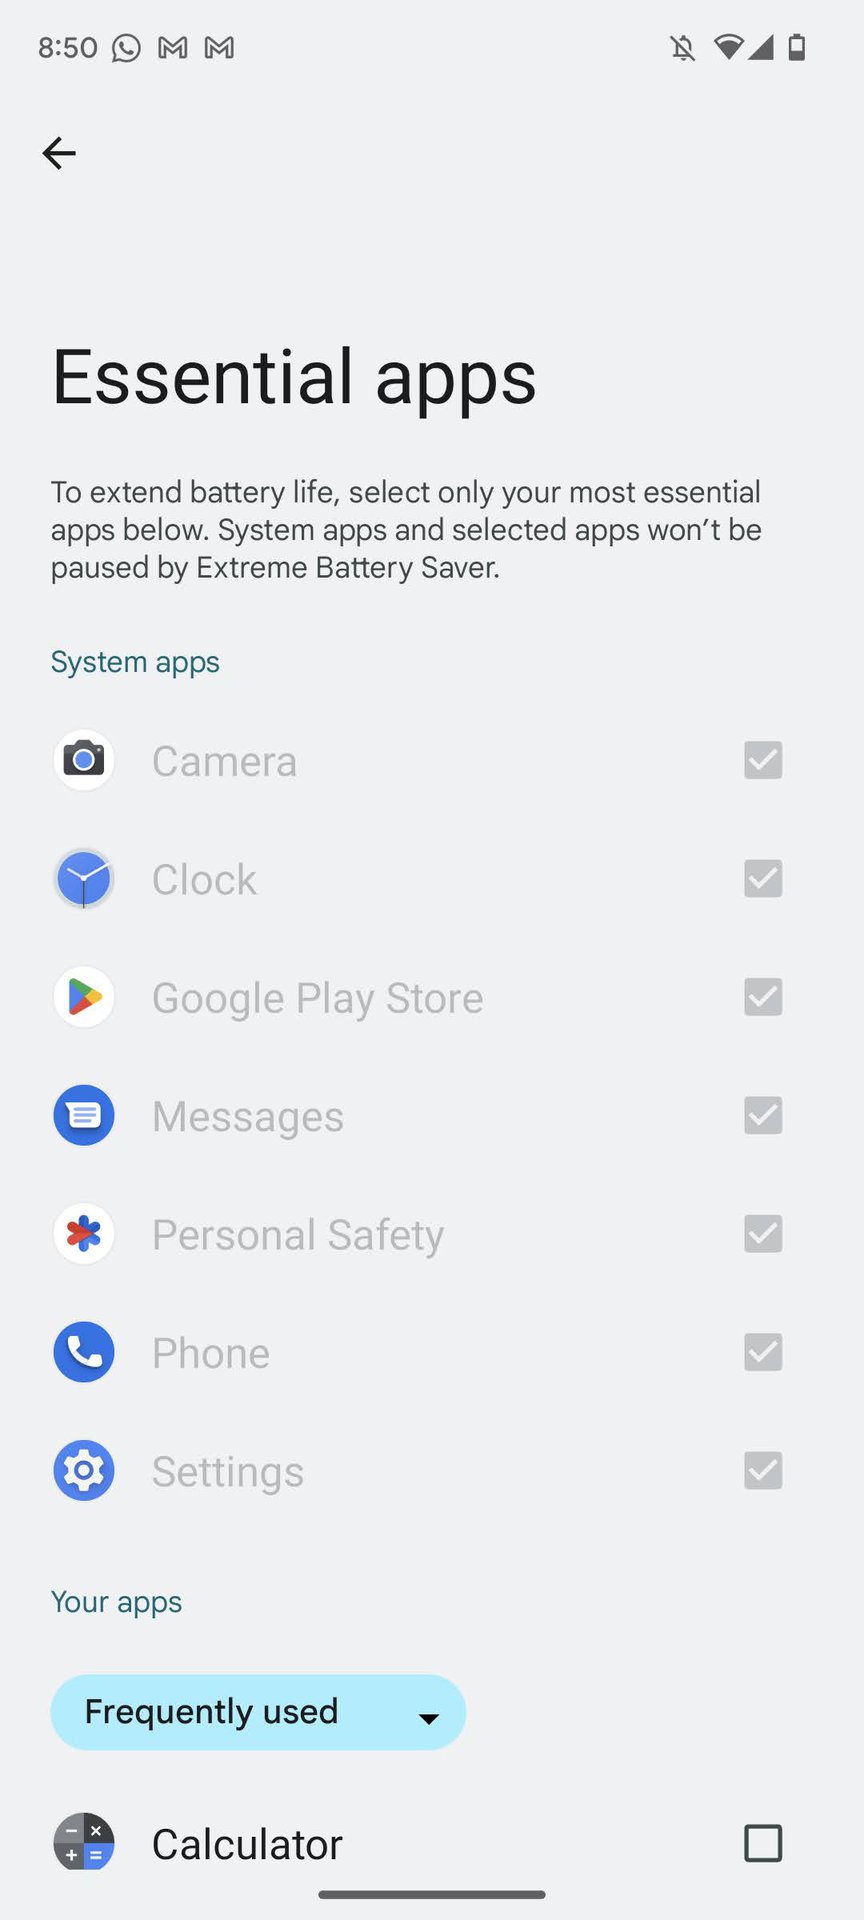 Picking essential apps for Extreme Battery Saver